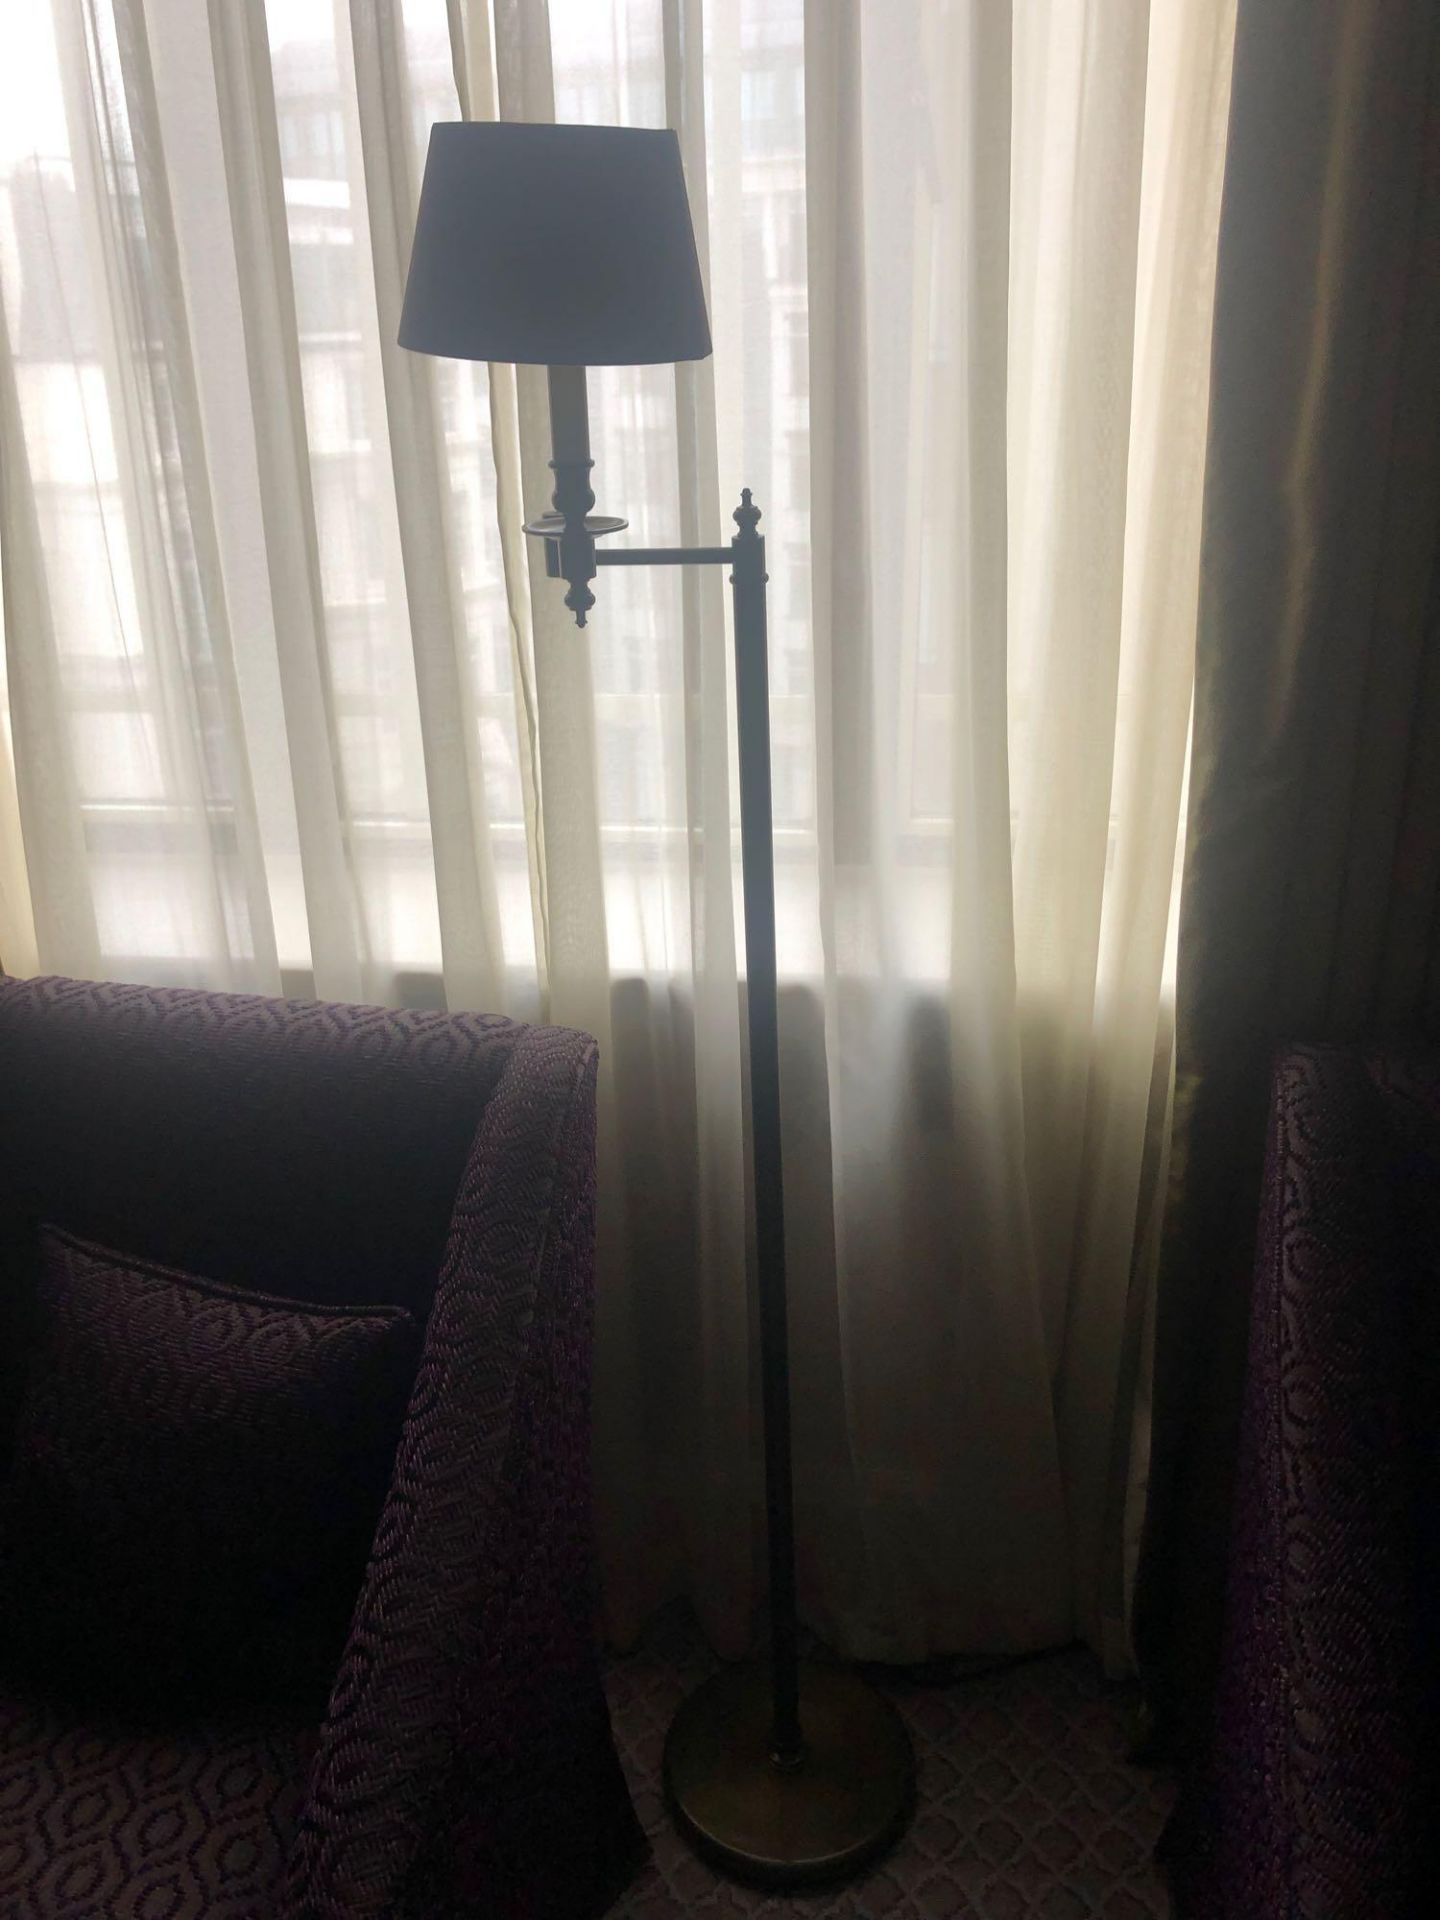 Library Floor Lamp Finished In English Bronze Swing Arm Function With Shade 156cm (Room 538)